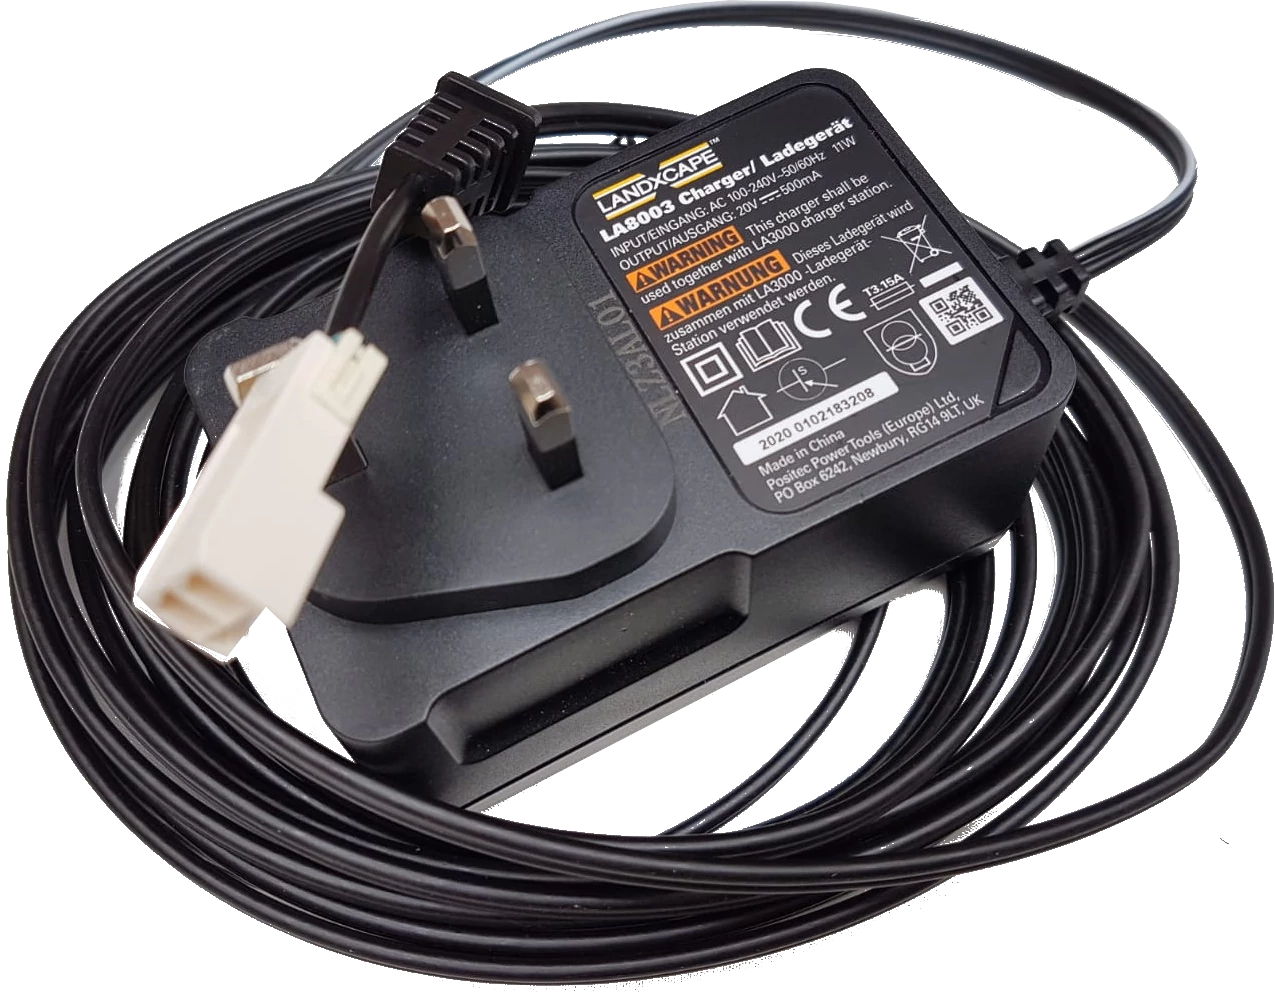 Charger for Landxcape robotic mower charging station